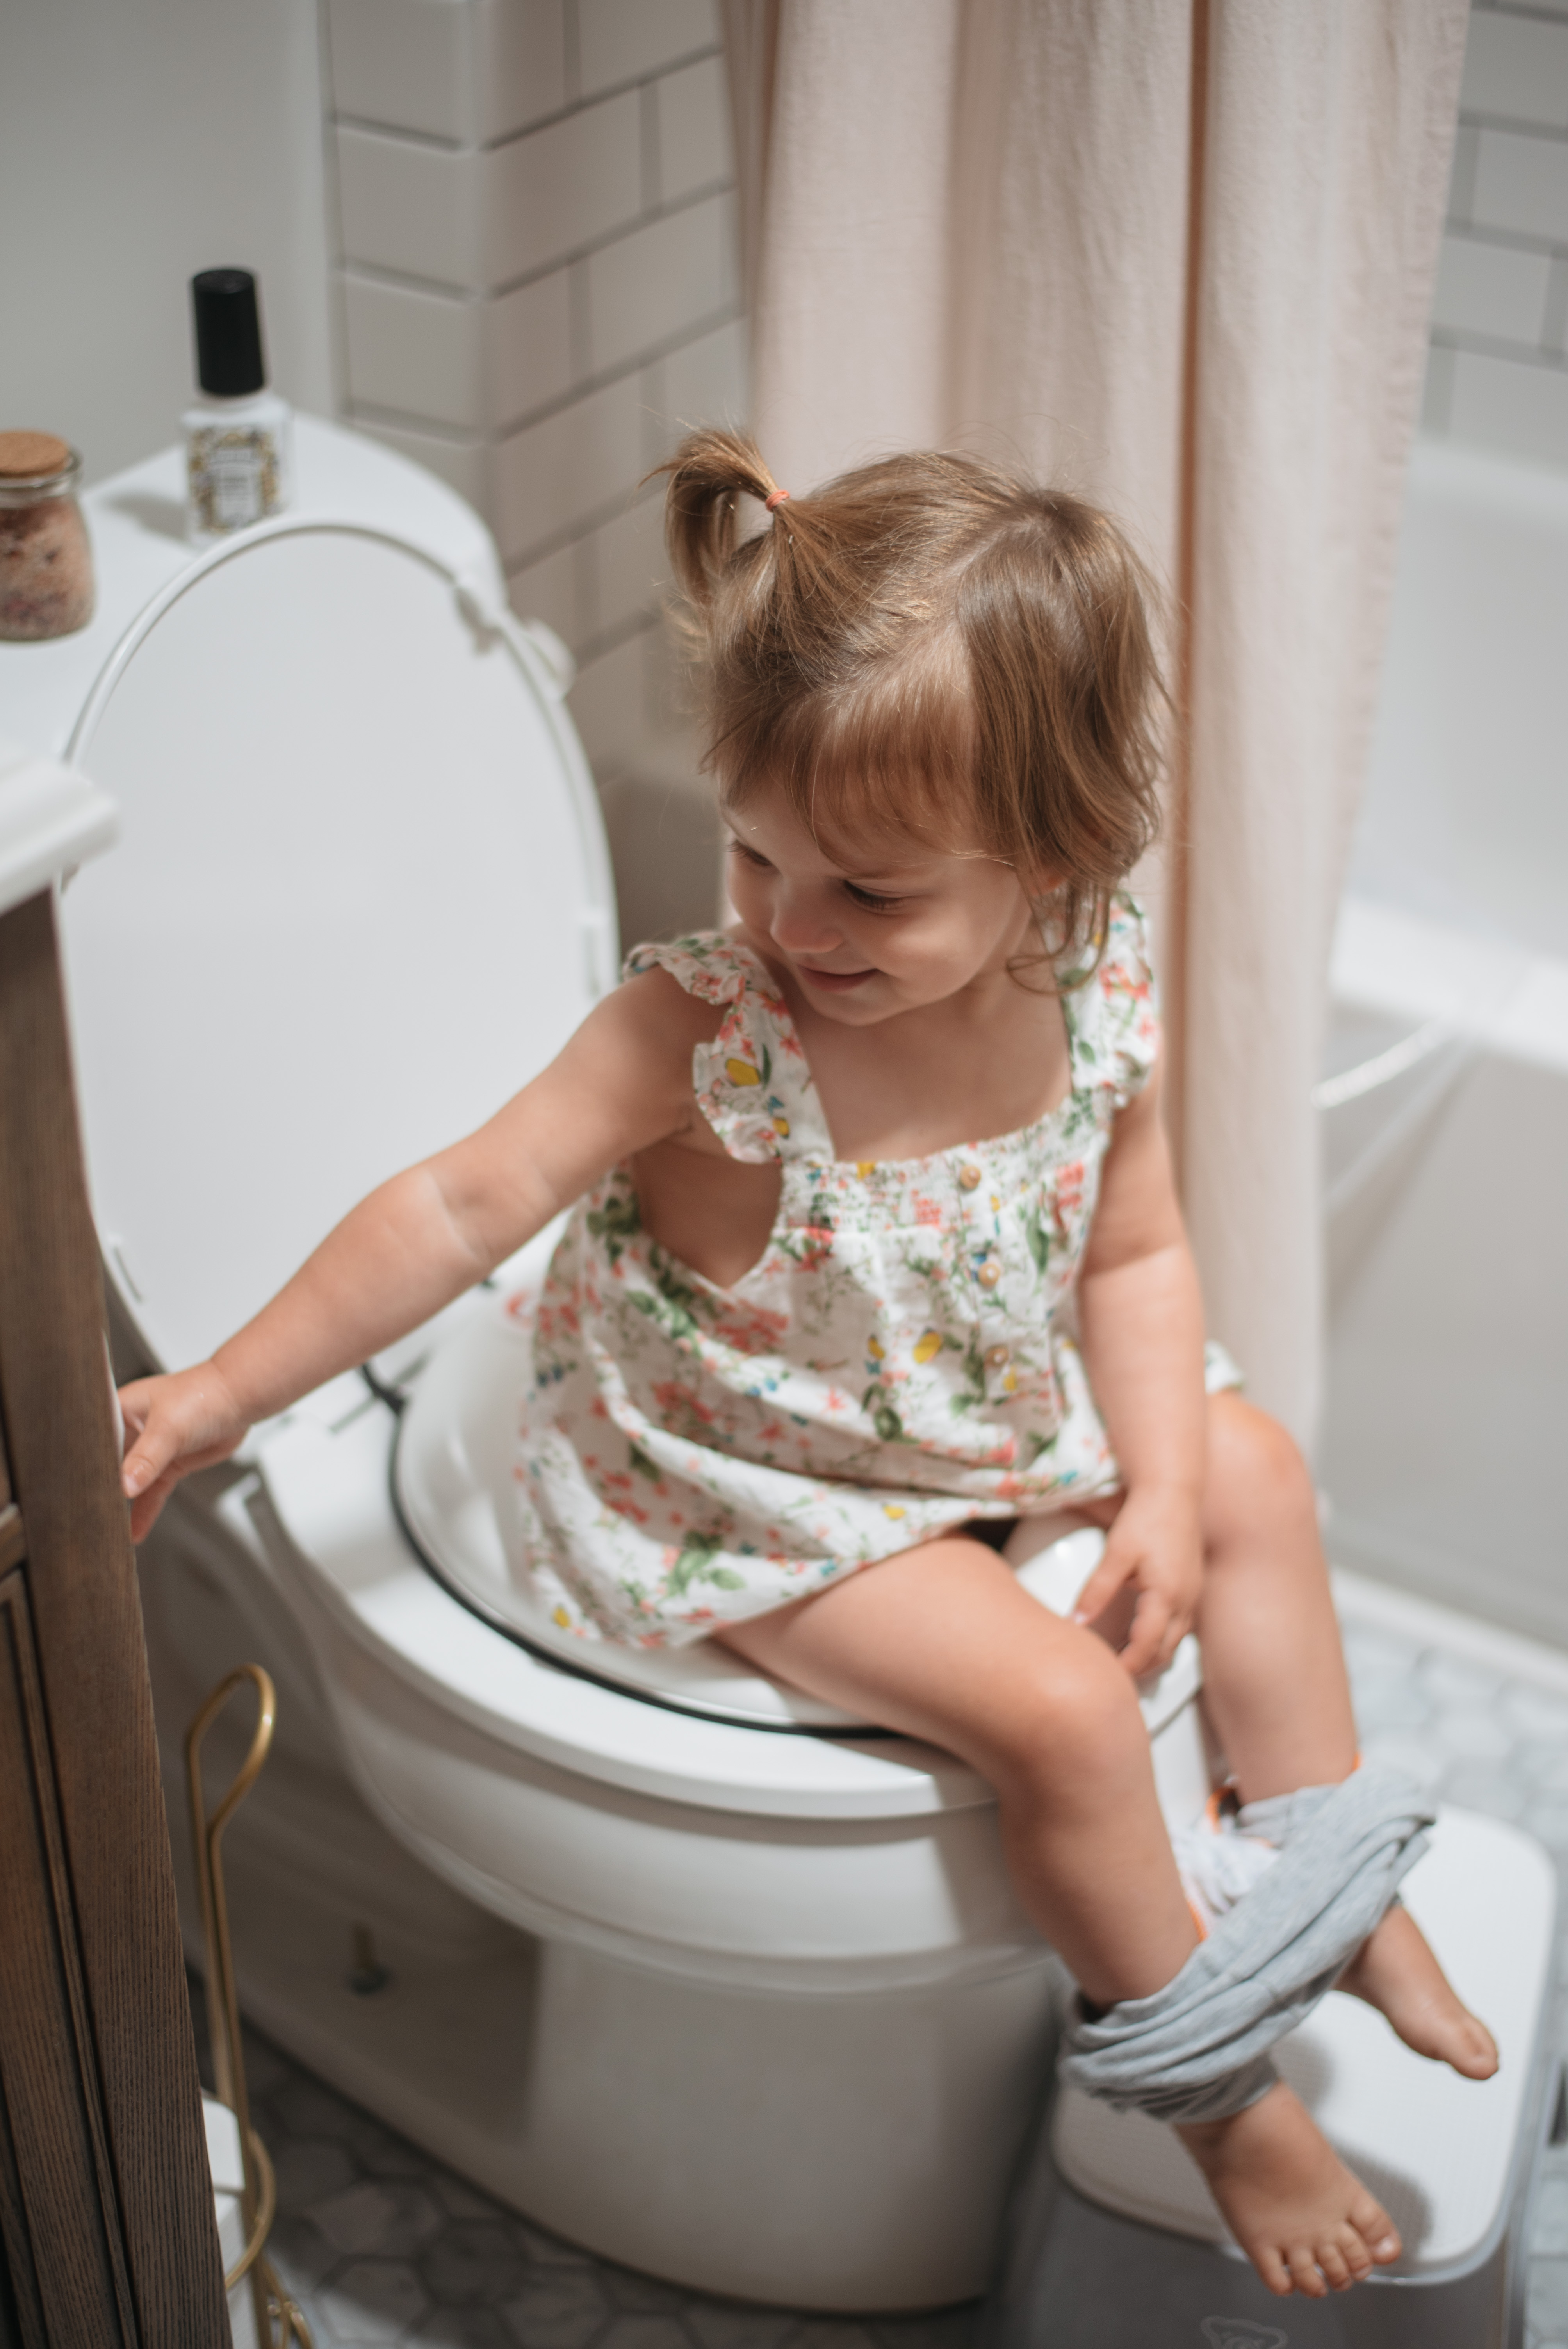 Toddler peeing and pooping out toilet